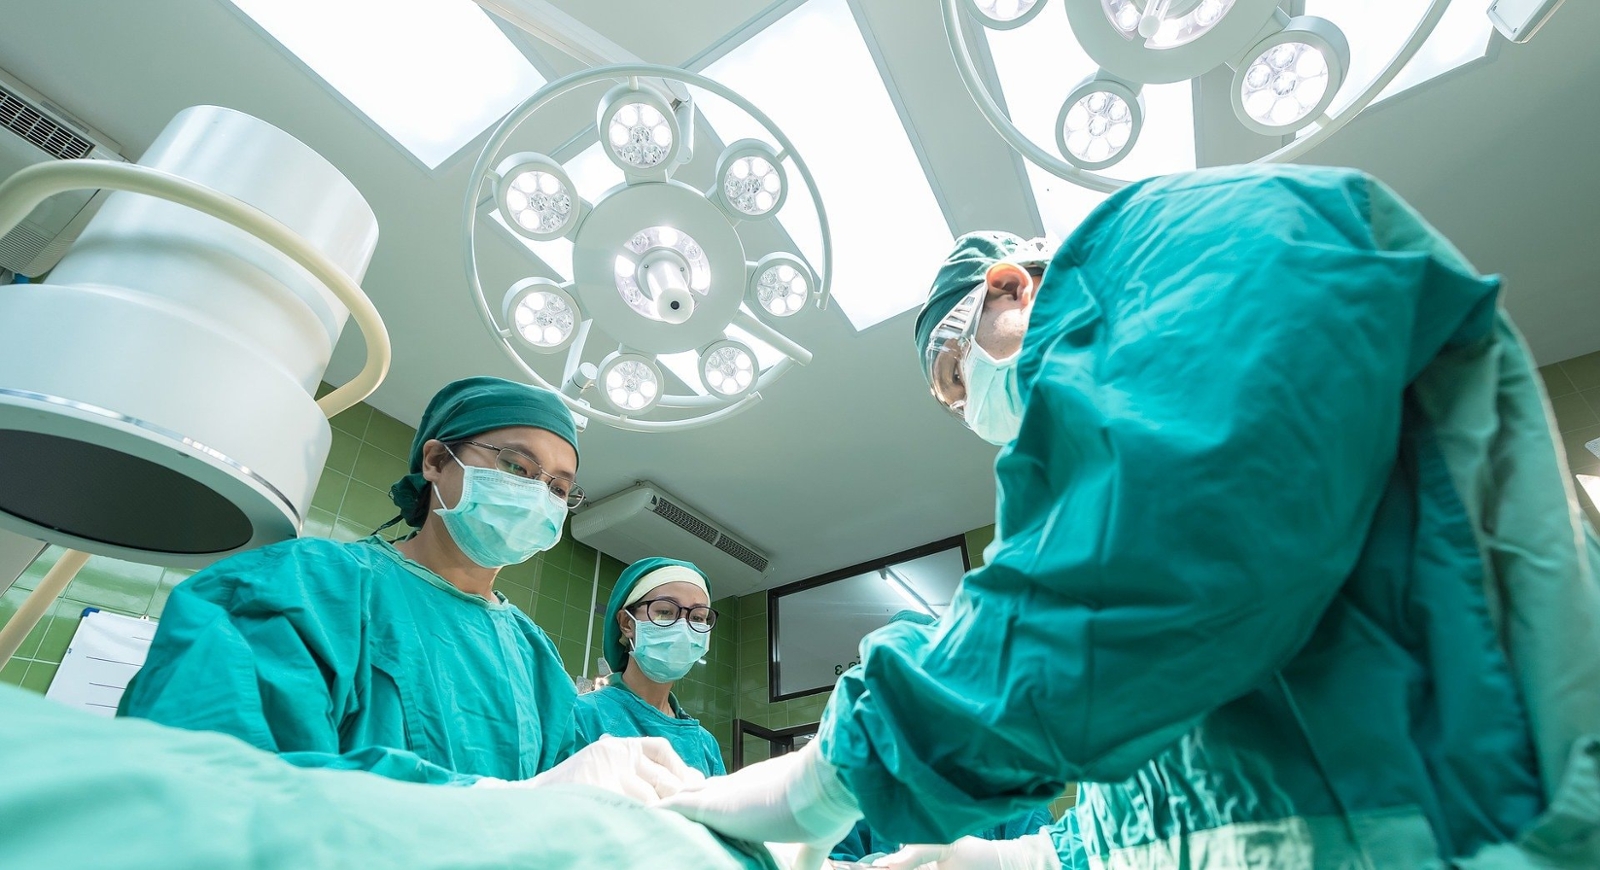 Photo angling above, showing surgeons leaning over an operating table and conducting a procedure